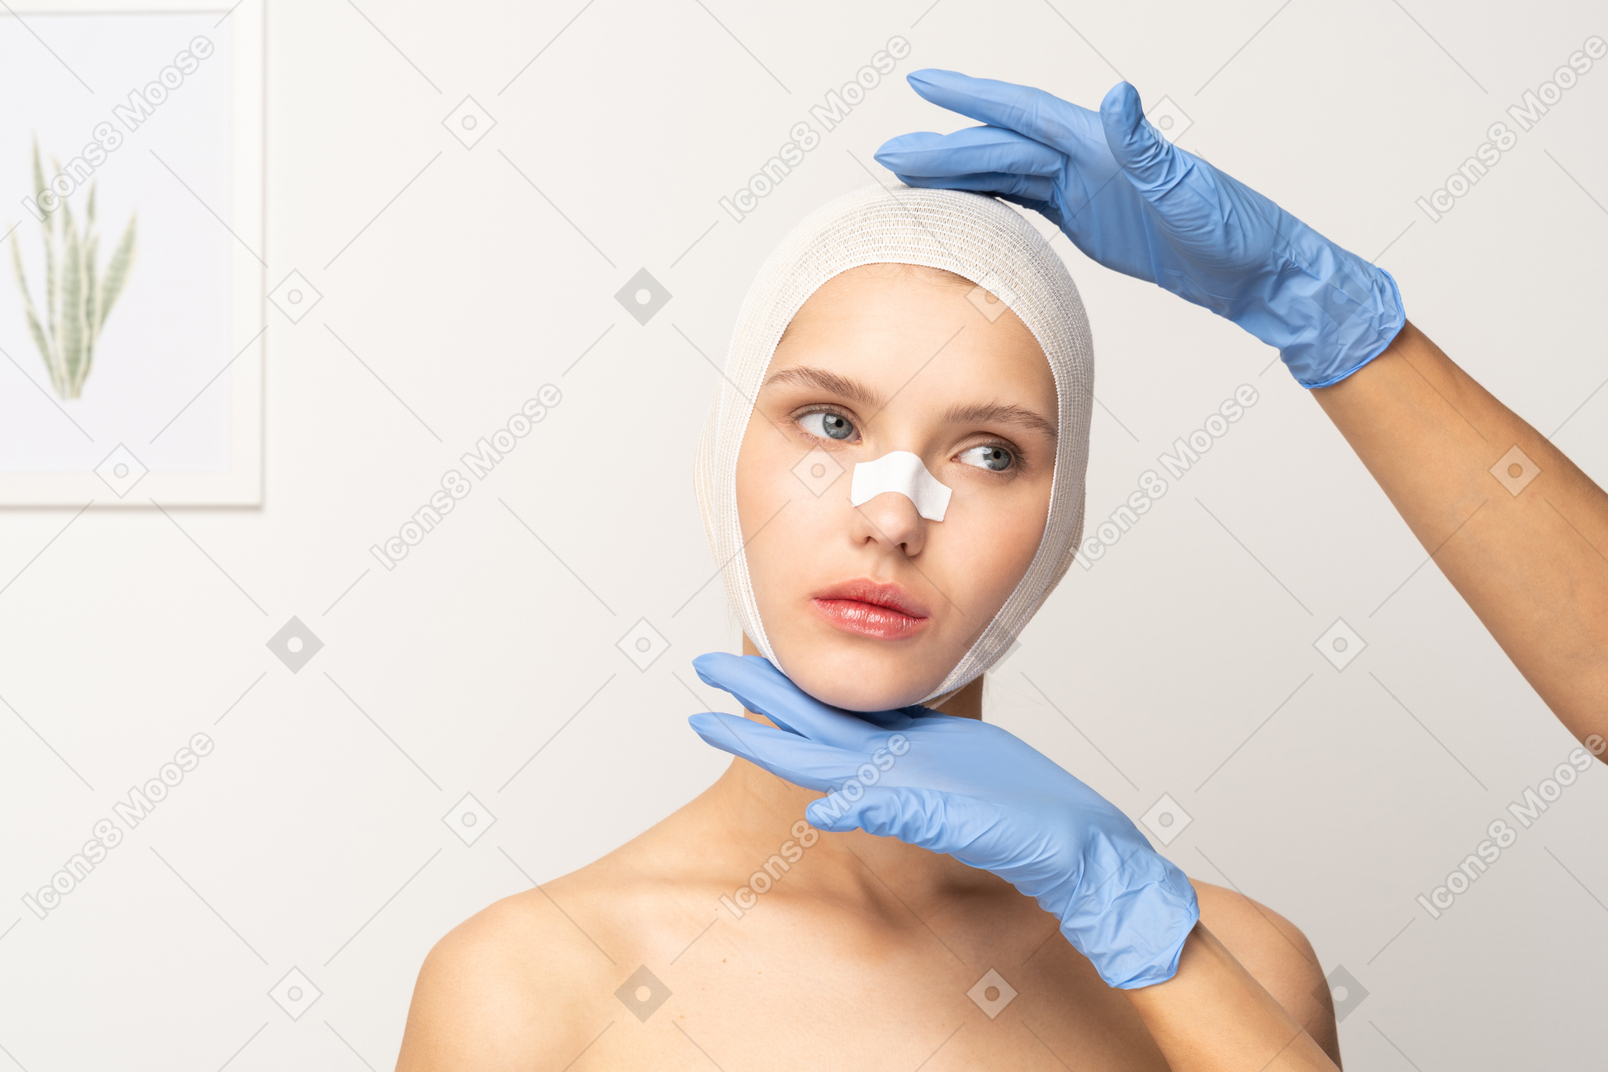 Female patient with gloved hands above and below her face